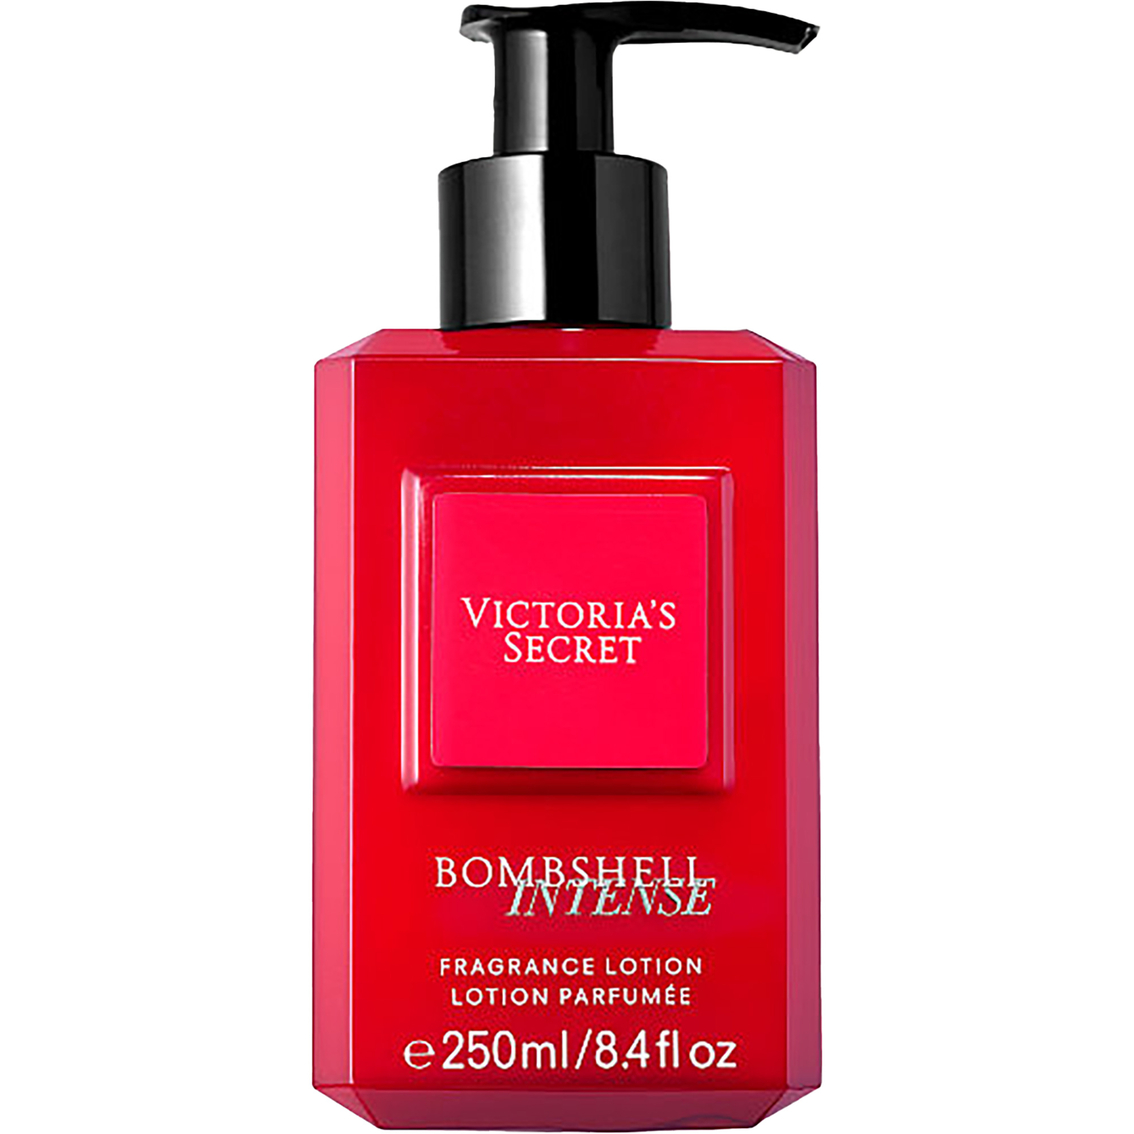 Victoria's Secret Bombshell Intense Fragrance Lotion | Body Lotions | Beauty & Health | Shop The